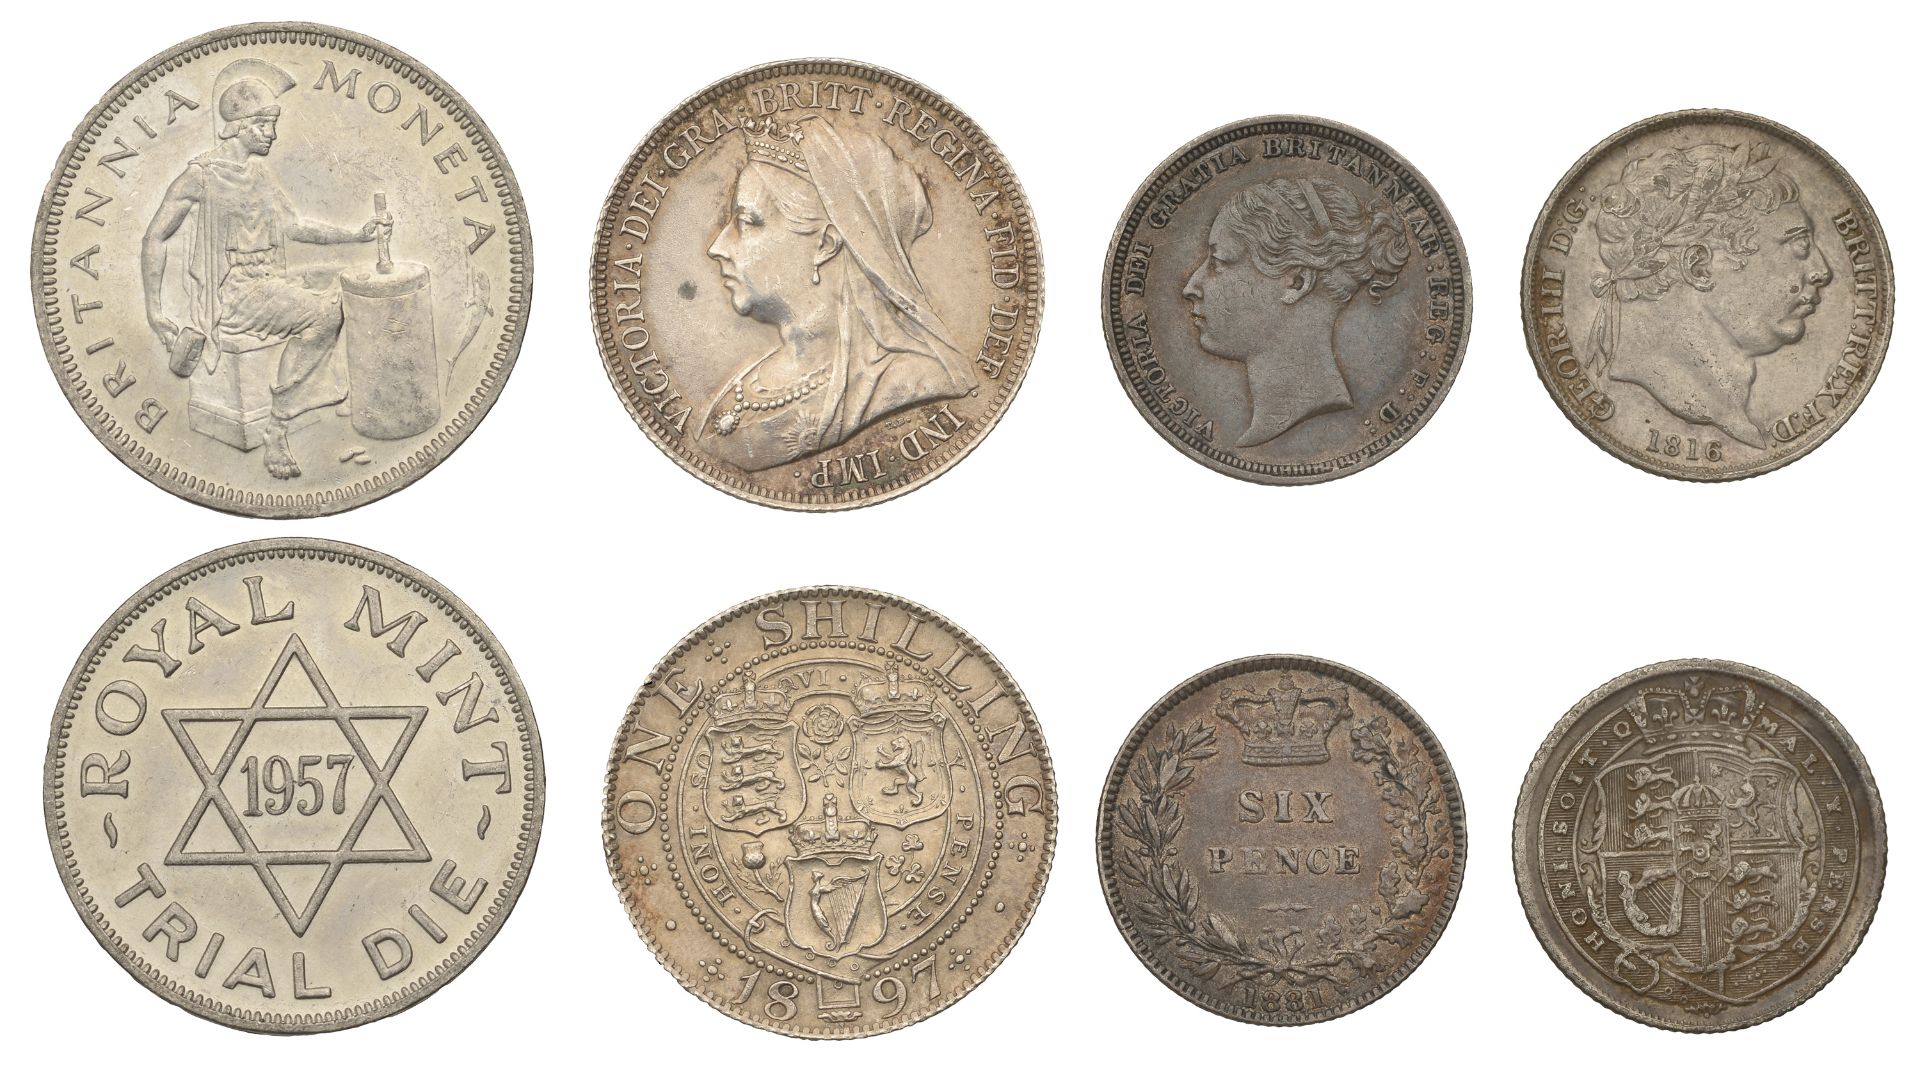 George III, Sixpence, 1816 (S 3791); Victoria, Shilling, 1897 (S 3940A); Sixpence, 1881 (S 3...